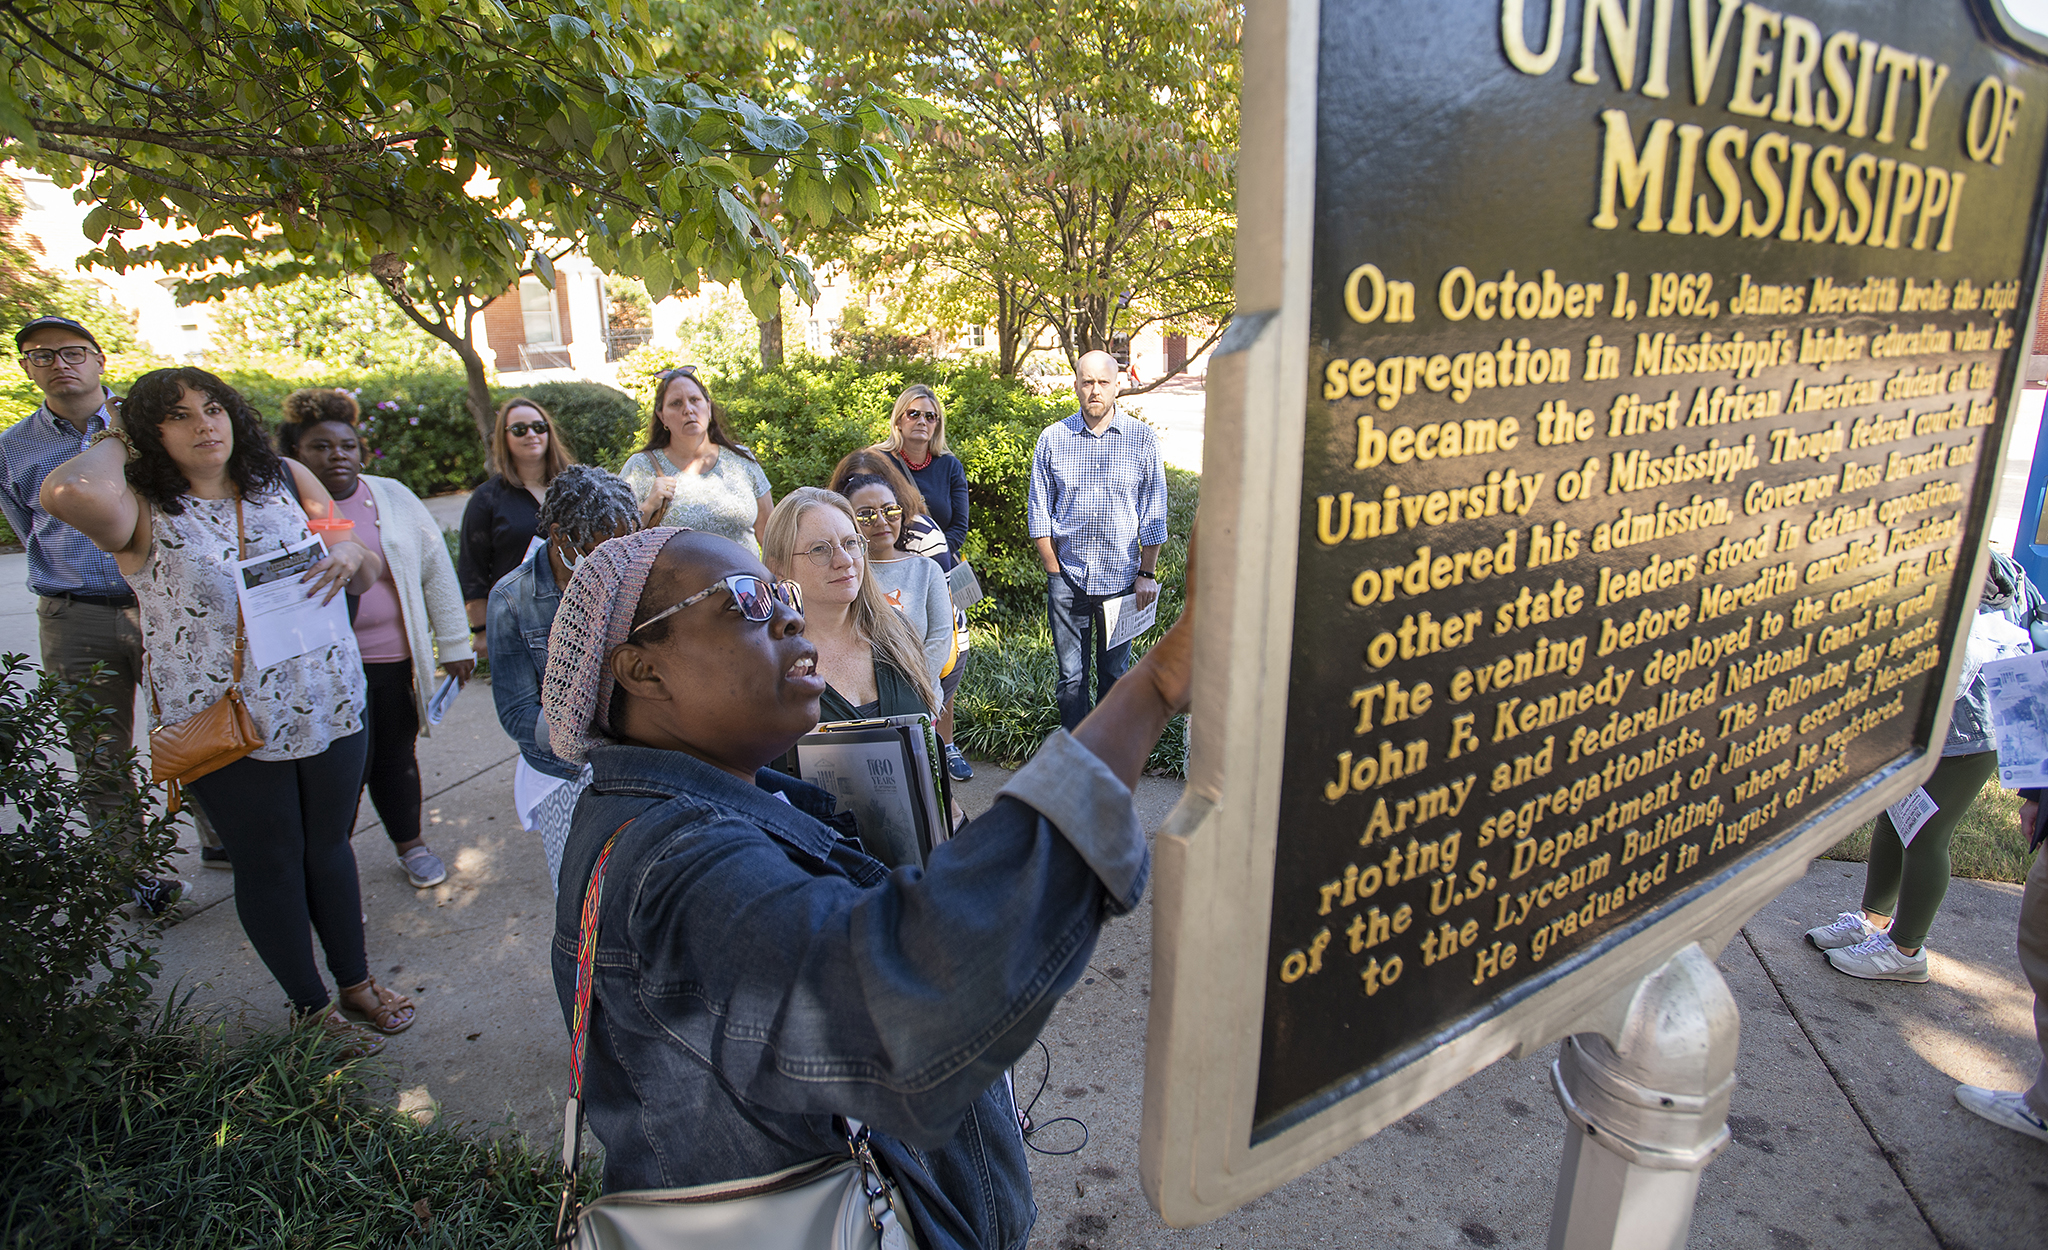 Rhondalyn Peairs (front), tour speaker and founder of Historich, an educational tourism company that organized the Civil Rights in Oxford Town bus tour, speaks about the Freedom Trail Marker on the UM campus during a tour. Photo by Thomas Graning/Ole Miss Digital Imaging Services